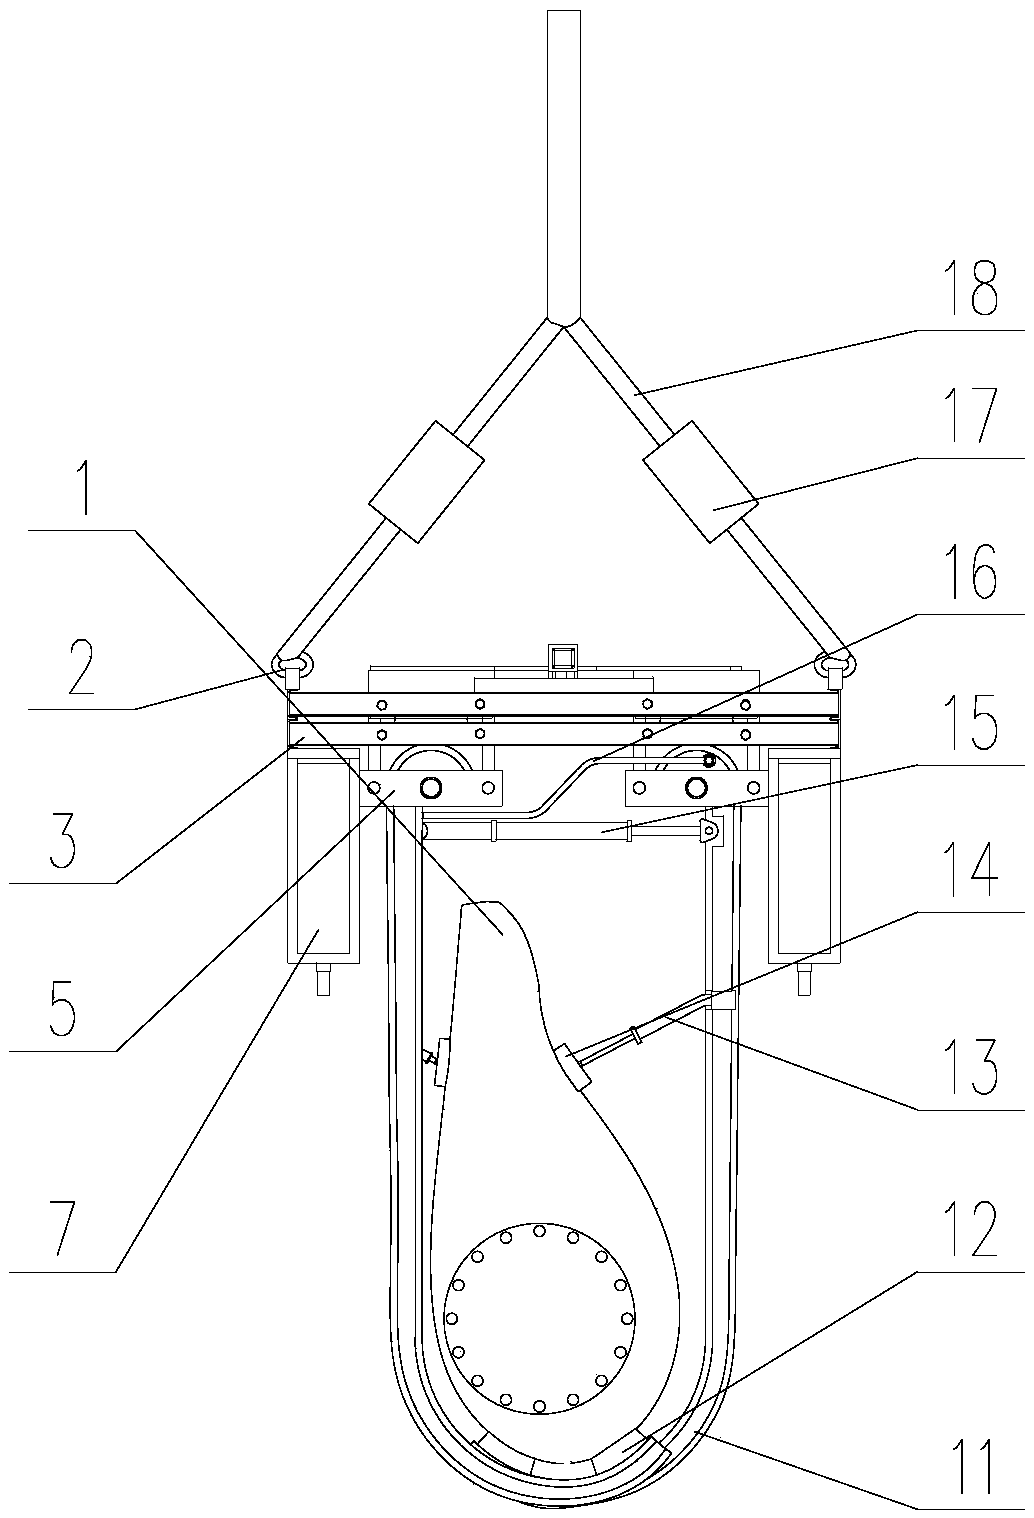 Lifting appliance device for installing wind-turbine blades, and operation method